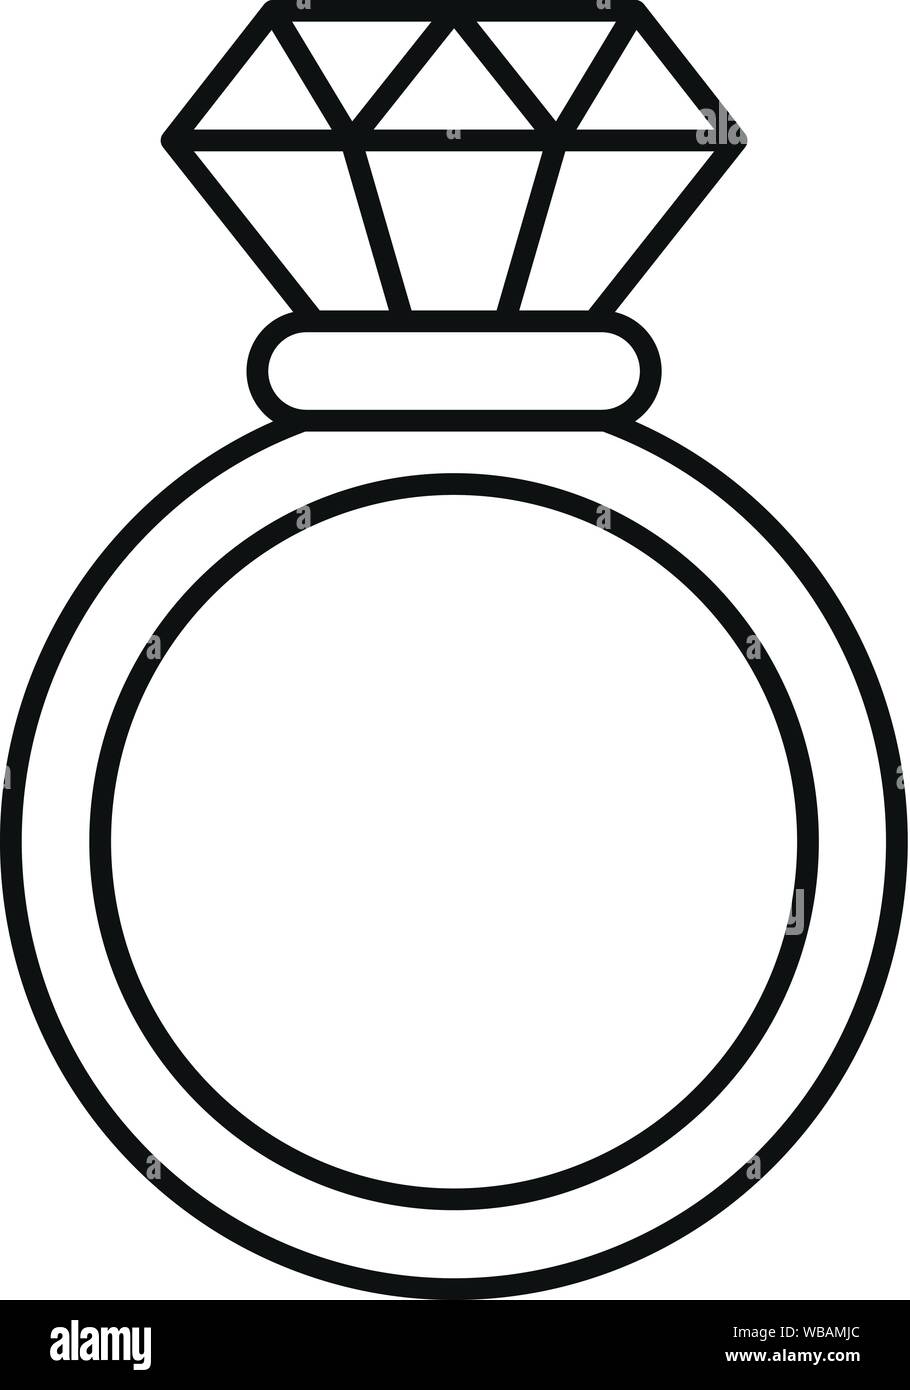 Brilliant Ring Icon Outline Brilliant Ring Stock Vector (Royalty Free)  1487776385 | Shutterstock